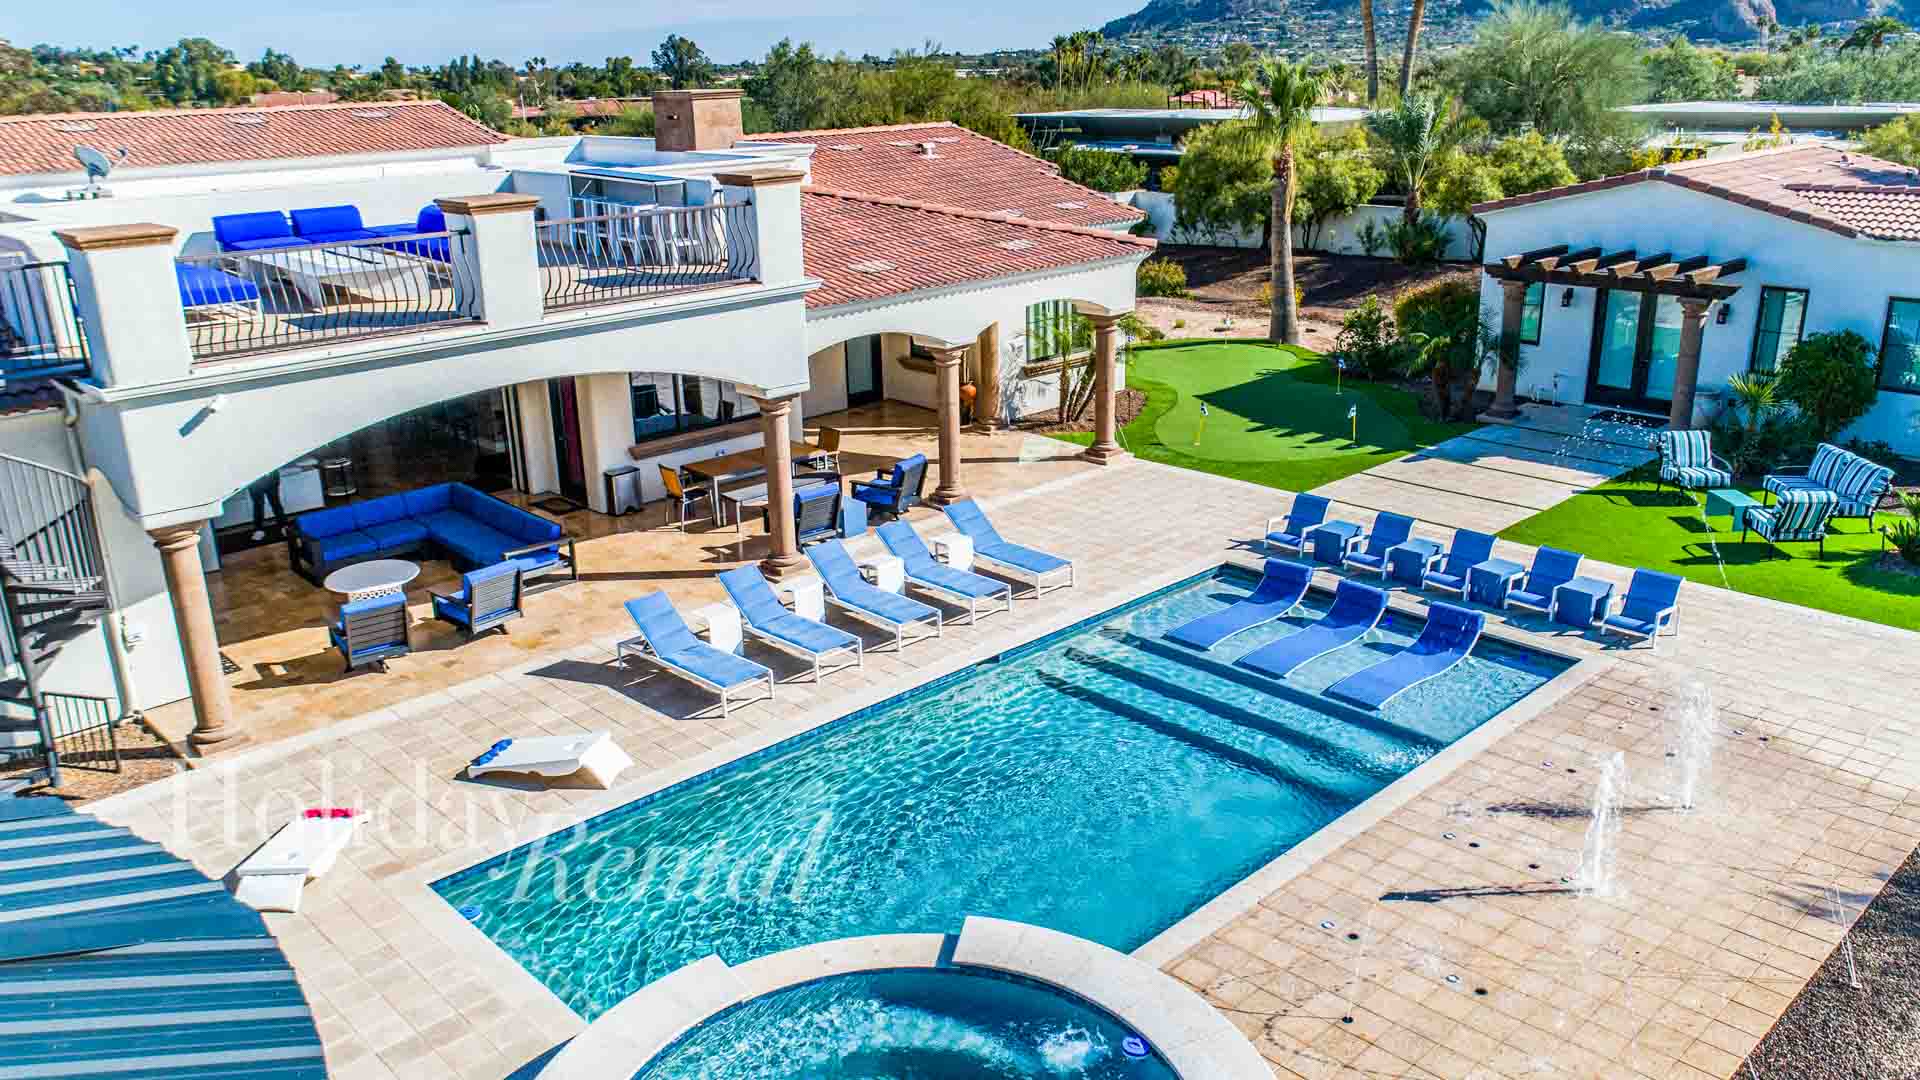 Amazing pool, splash pad, large patio, guest house, and rooftop patio